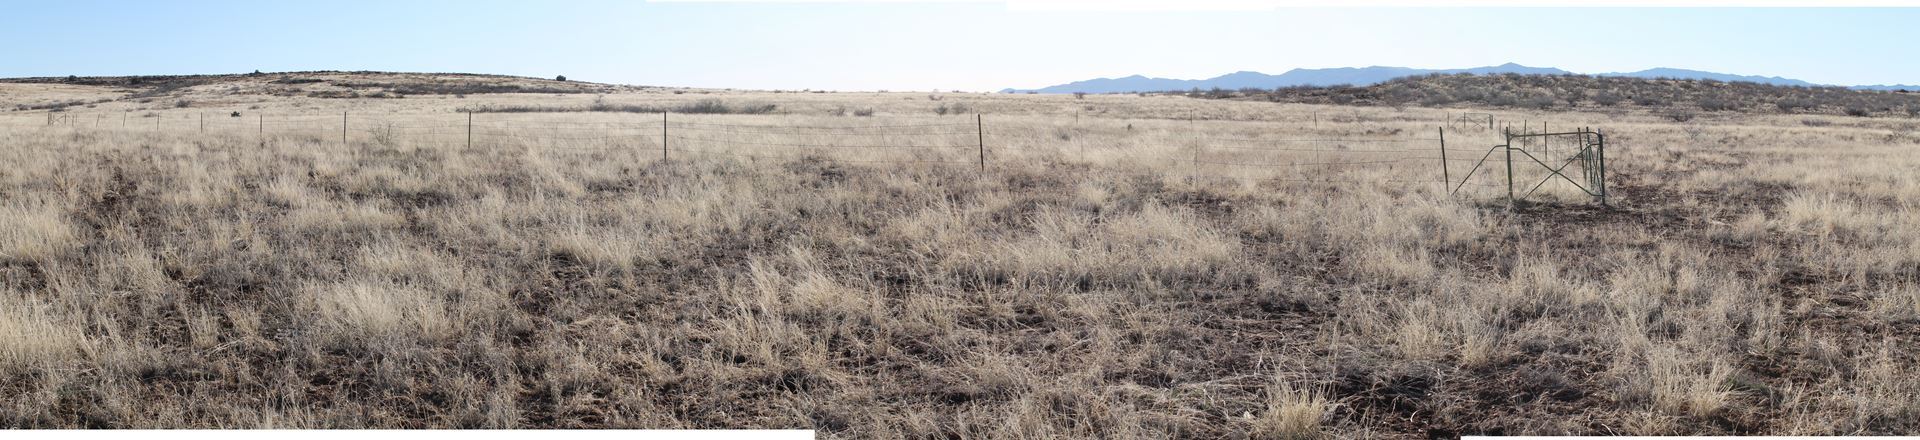 Wintertime grassland and monitored exclosure plot, AFNM, March 2013.